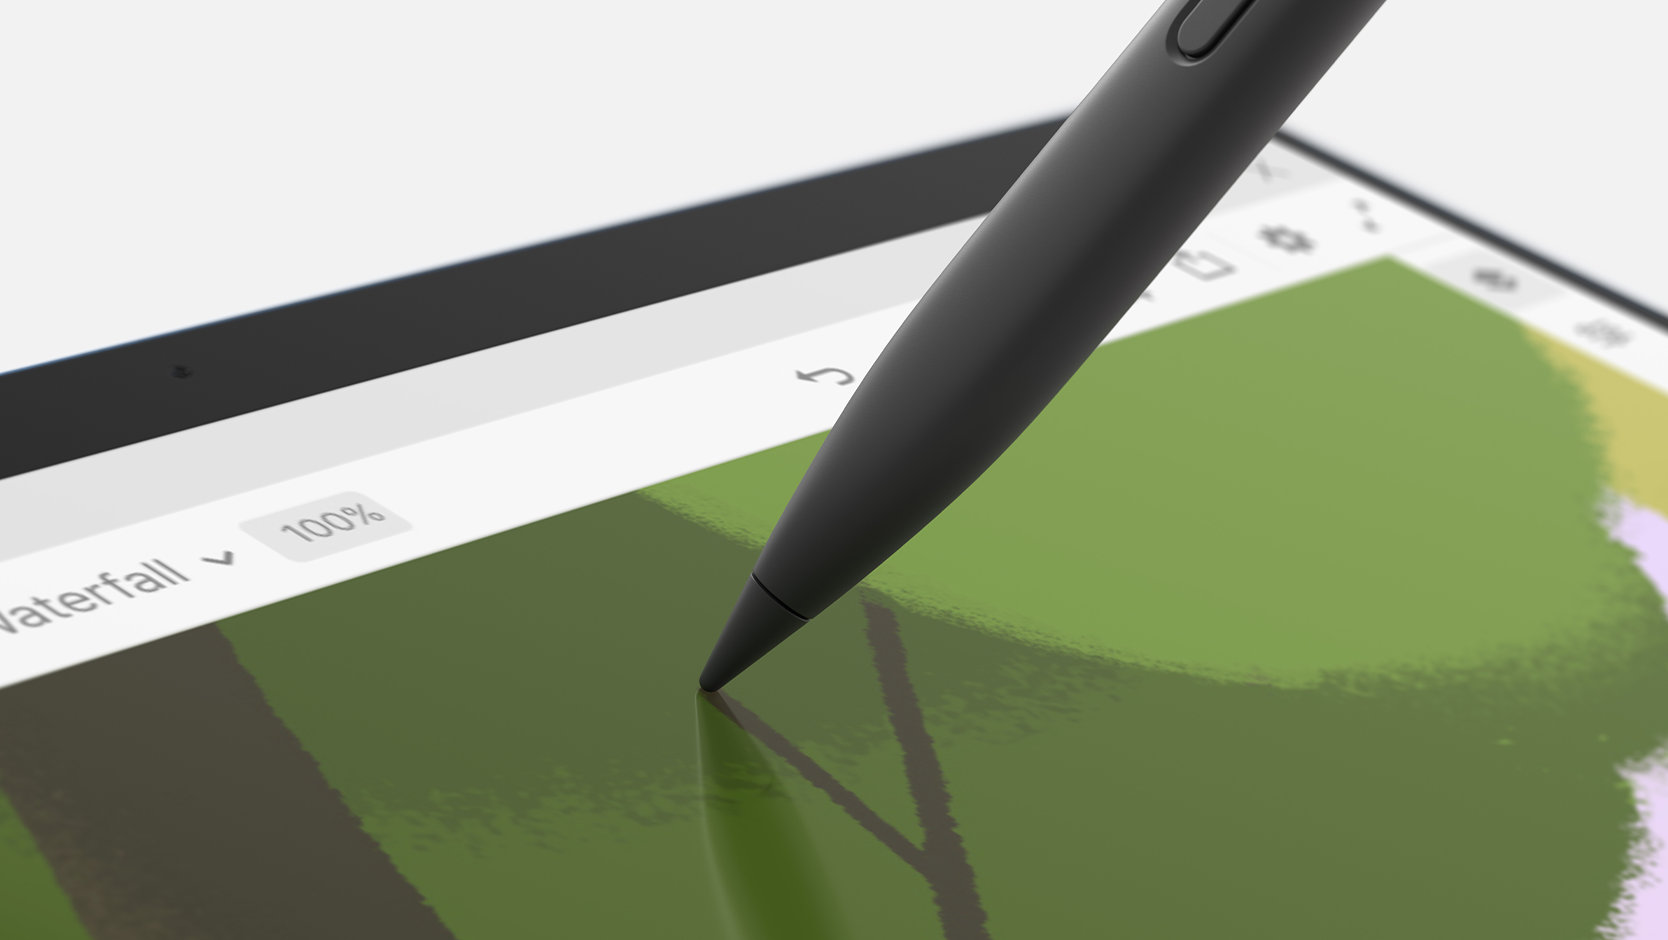 A Surface Slim Pen draws on the touchscreen of a Surface device.